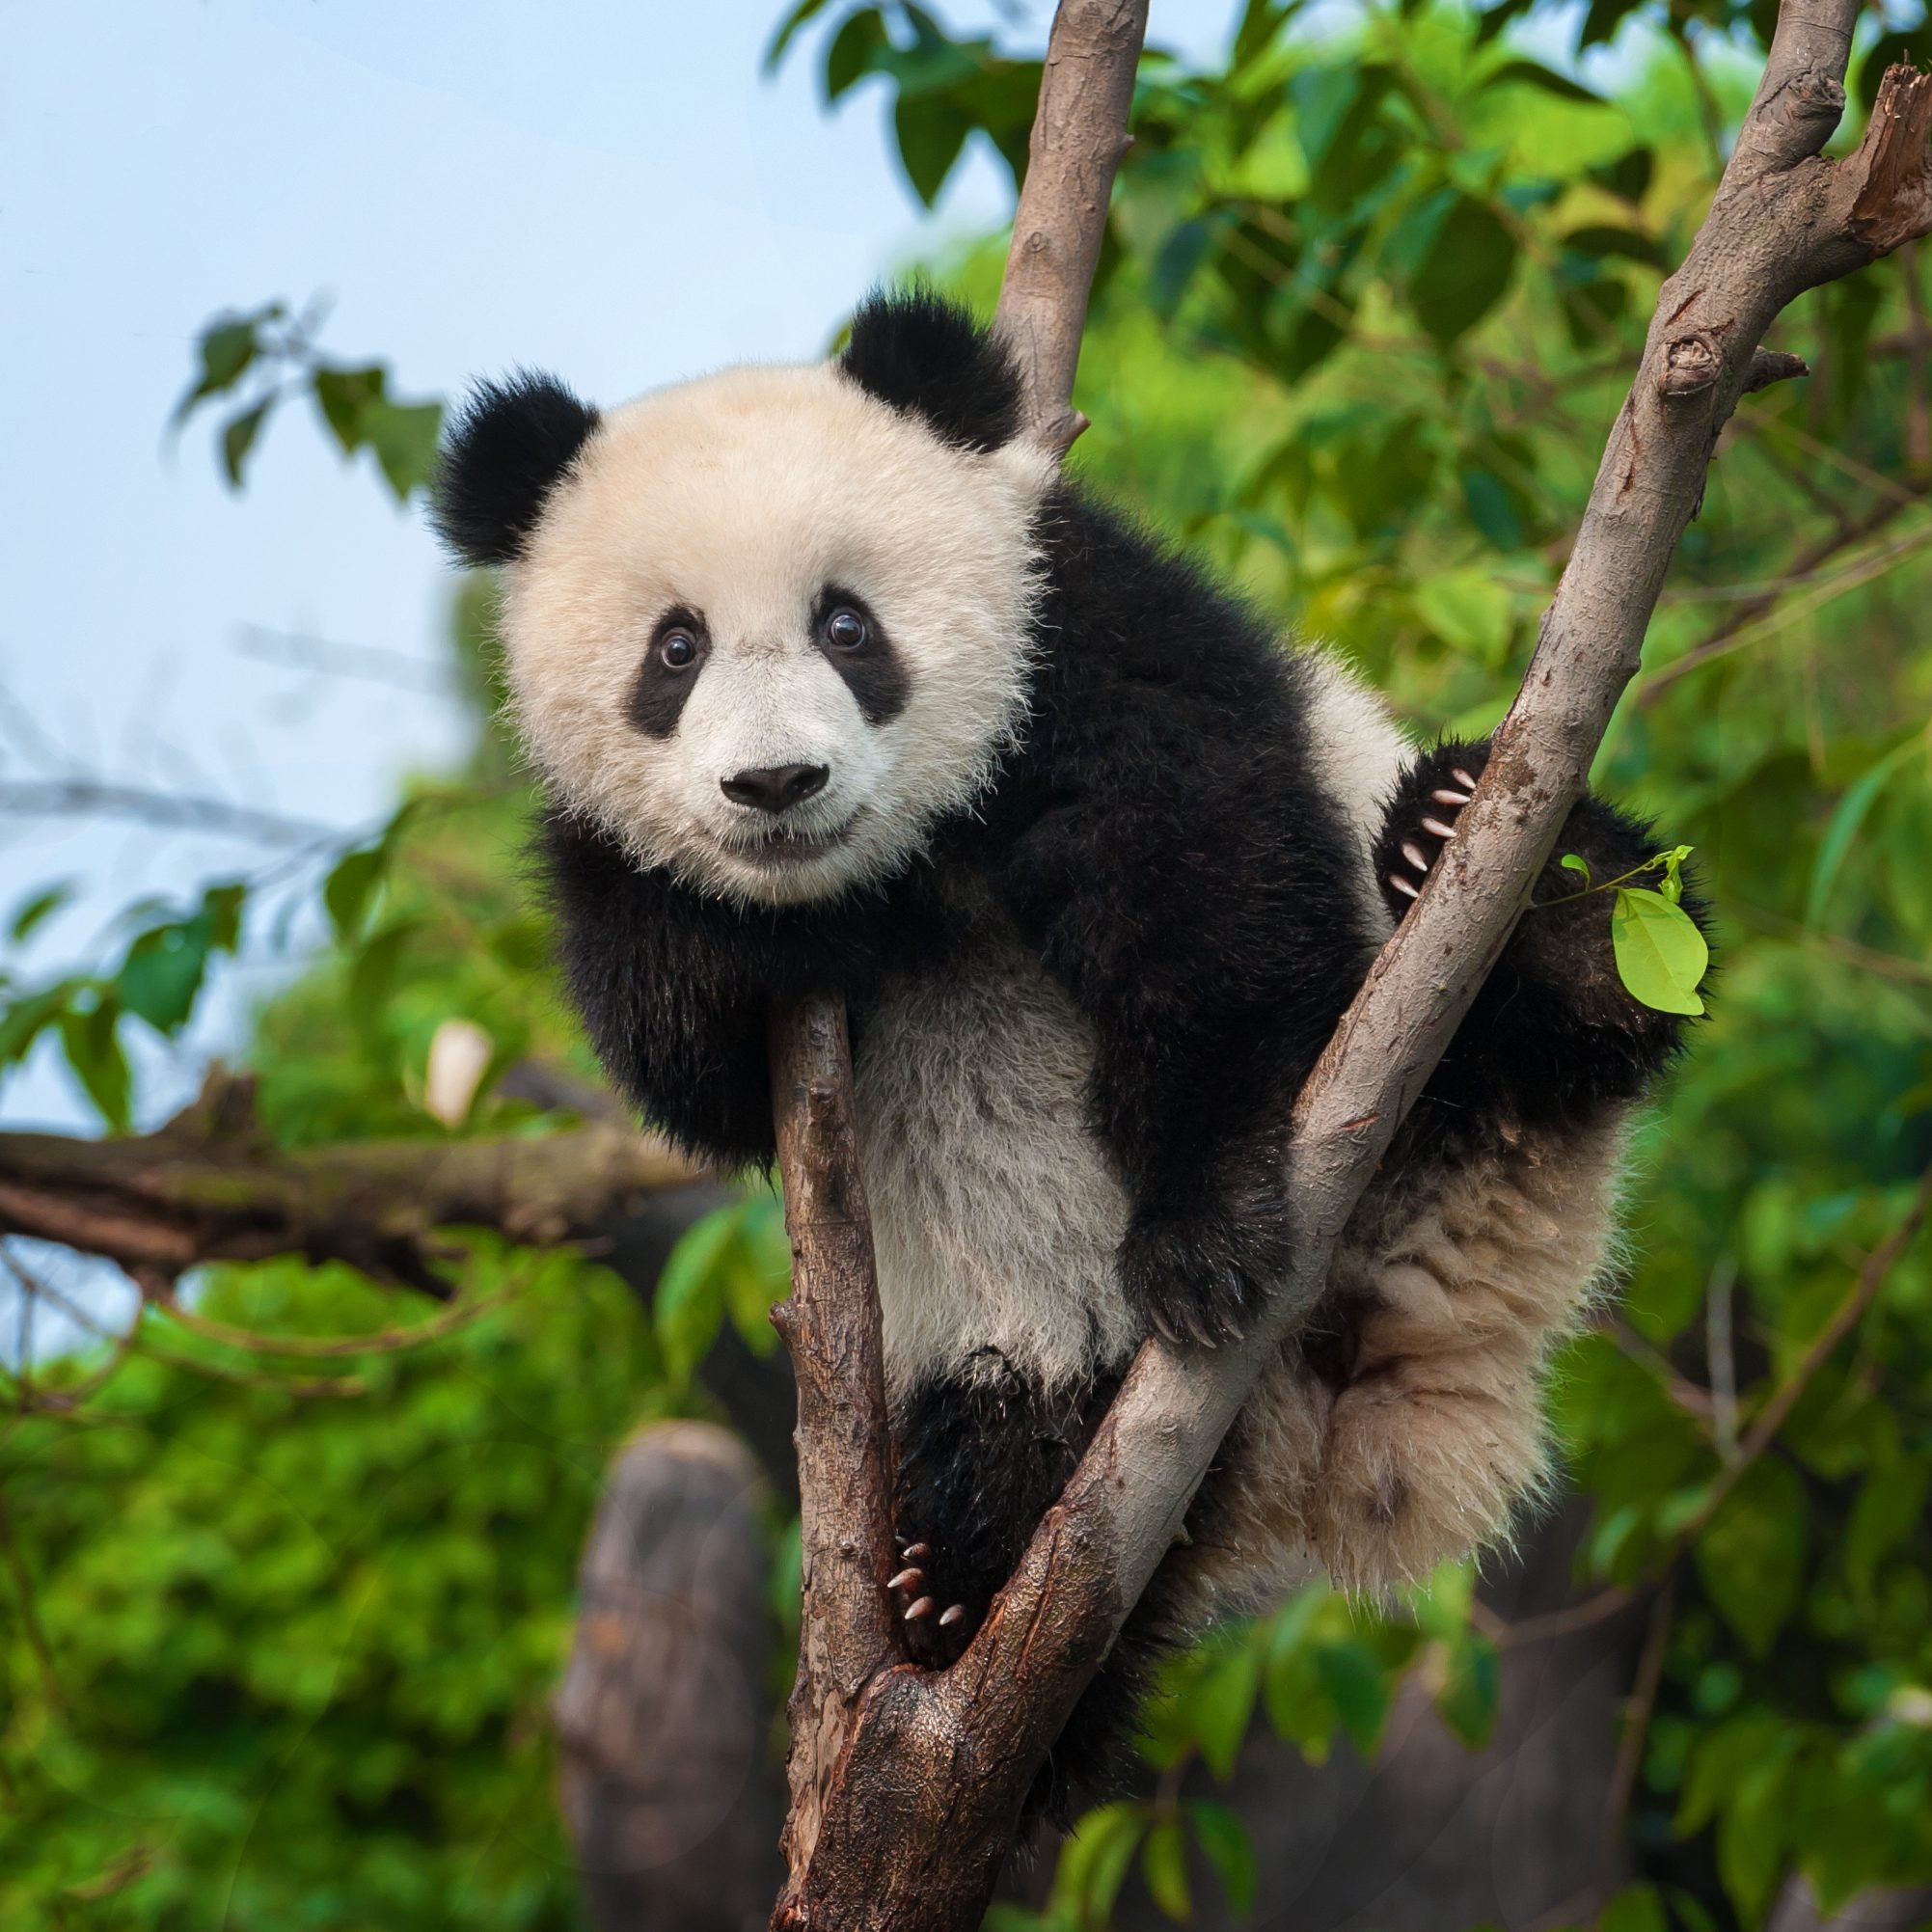 How many pandas are left in the world?